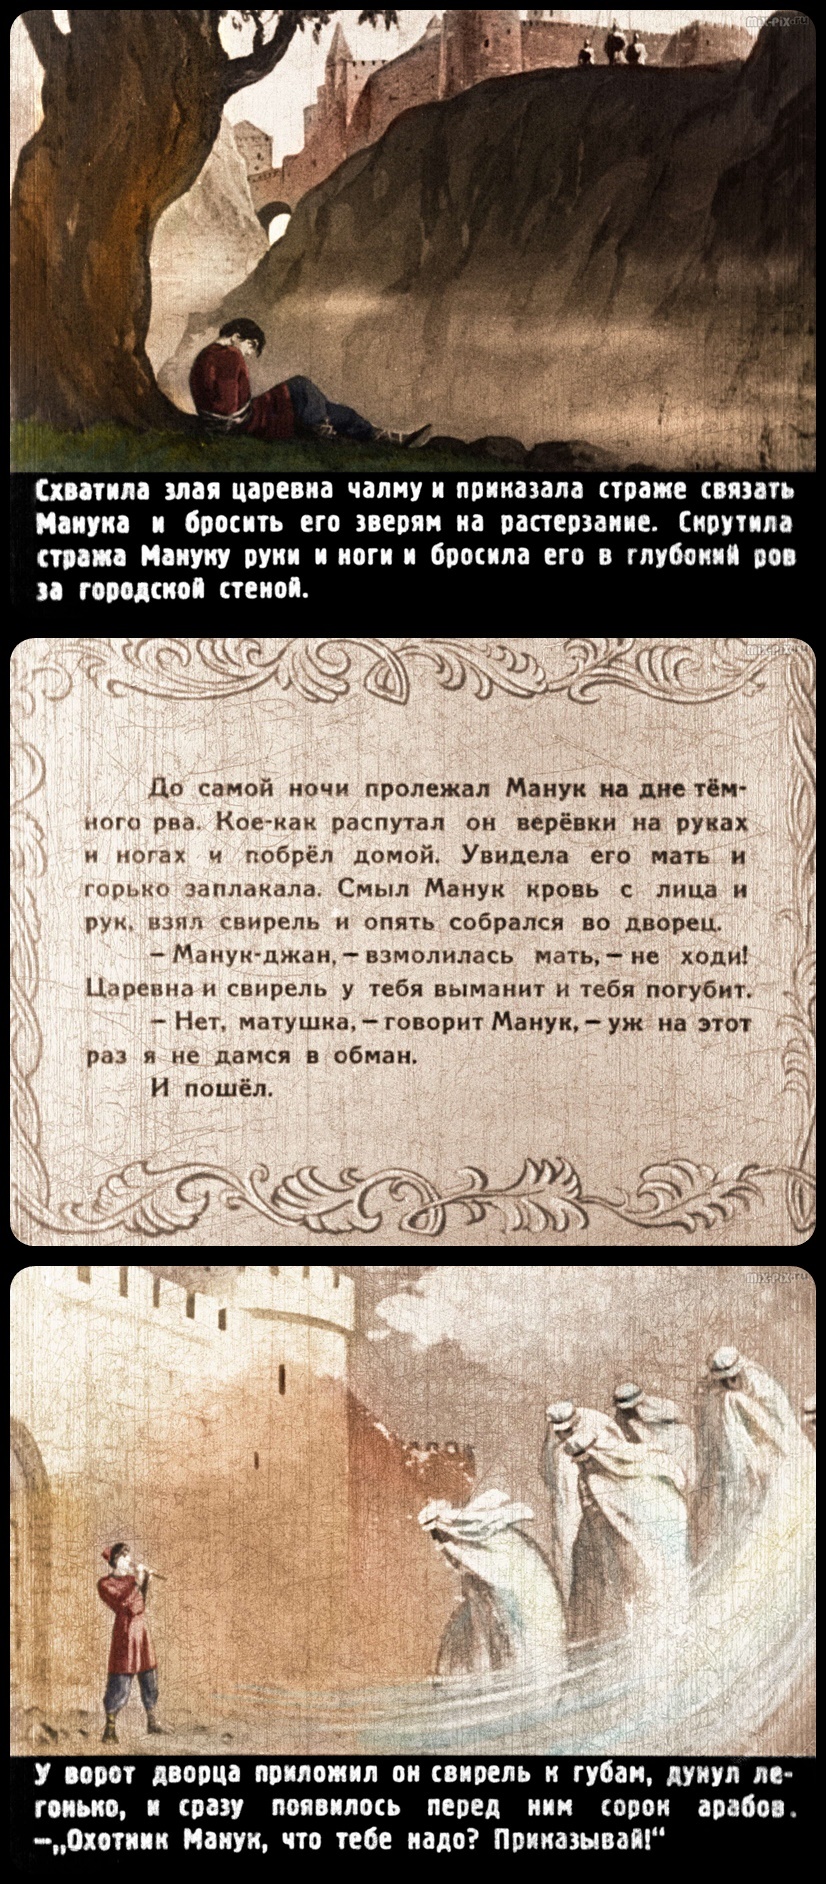 Filmstrip - Hunter Manuk (1954) - the USSR, Longpost, Film-strip, Past, Picture with text, Story, Filmstrips